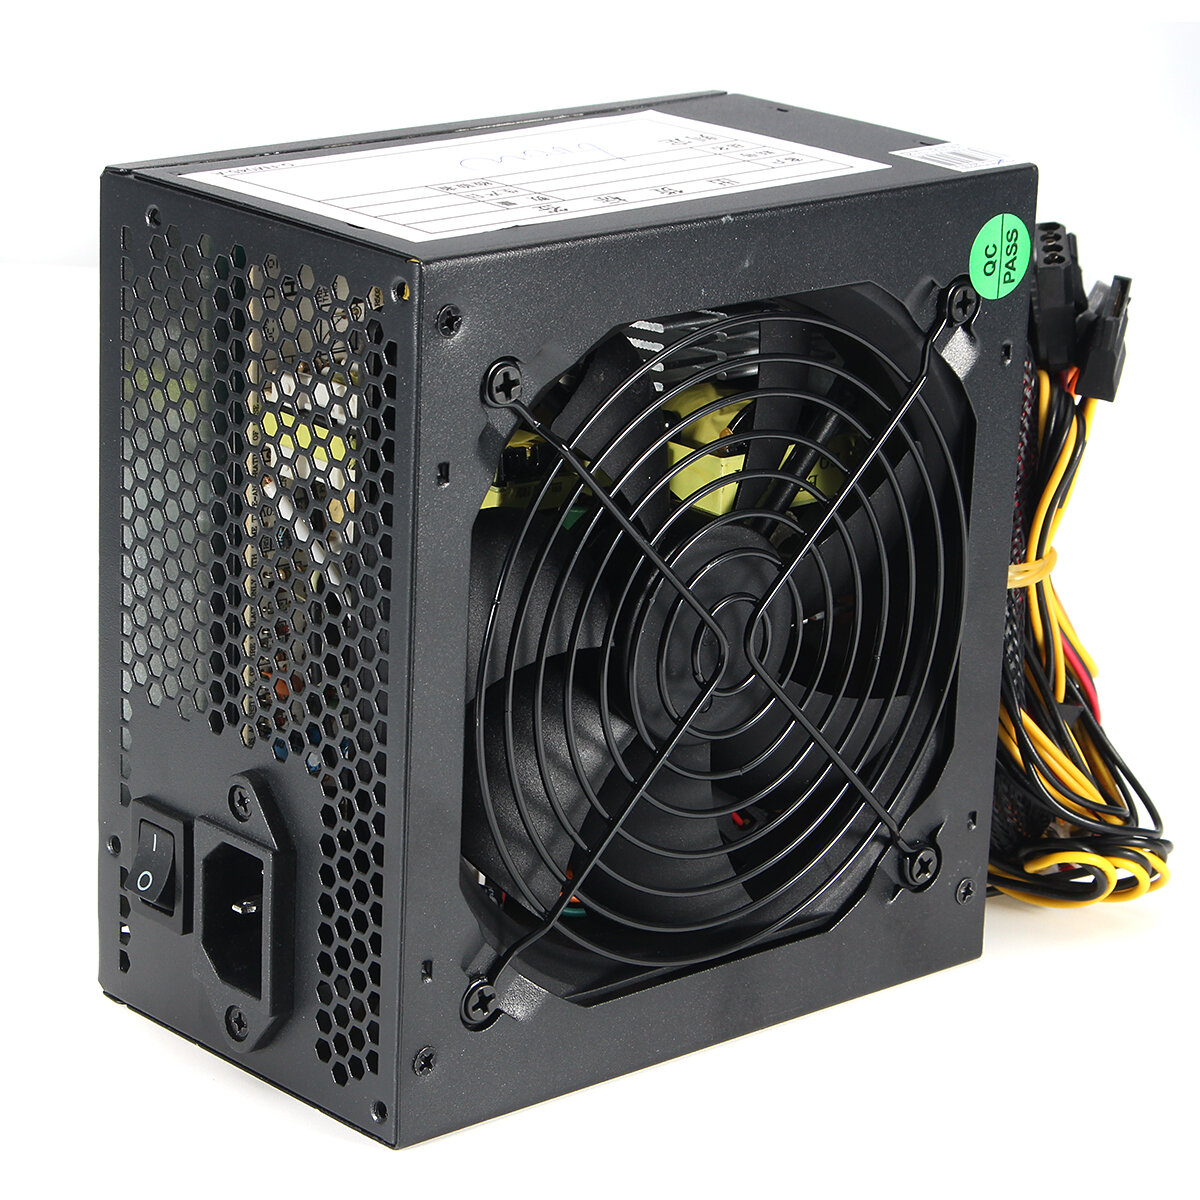 Image of 600W PC Power Supply Quiet ATX 12V 24Pins 12CM Cooling Fan Desktop Computer Power Supply Gaming PSU for AMD Intel